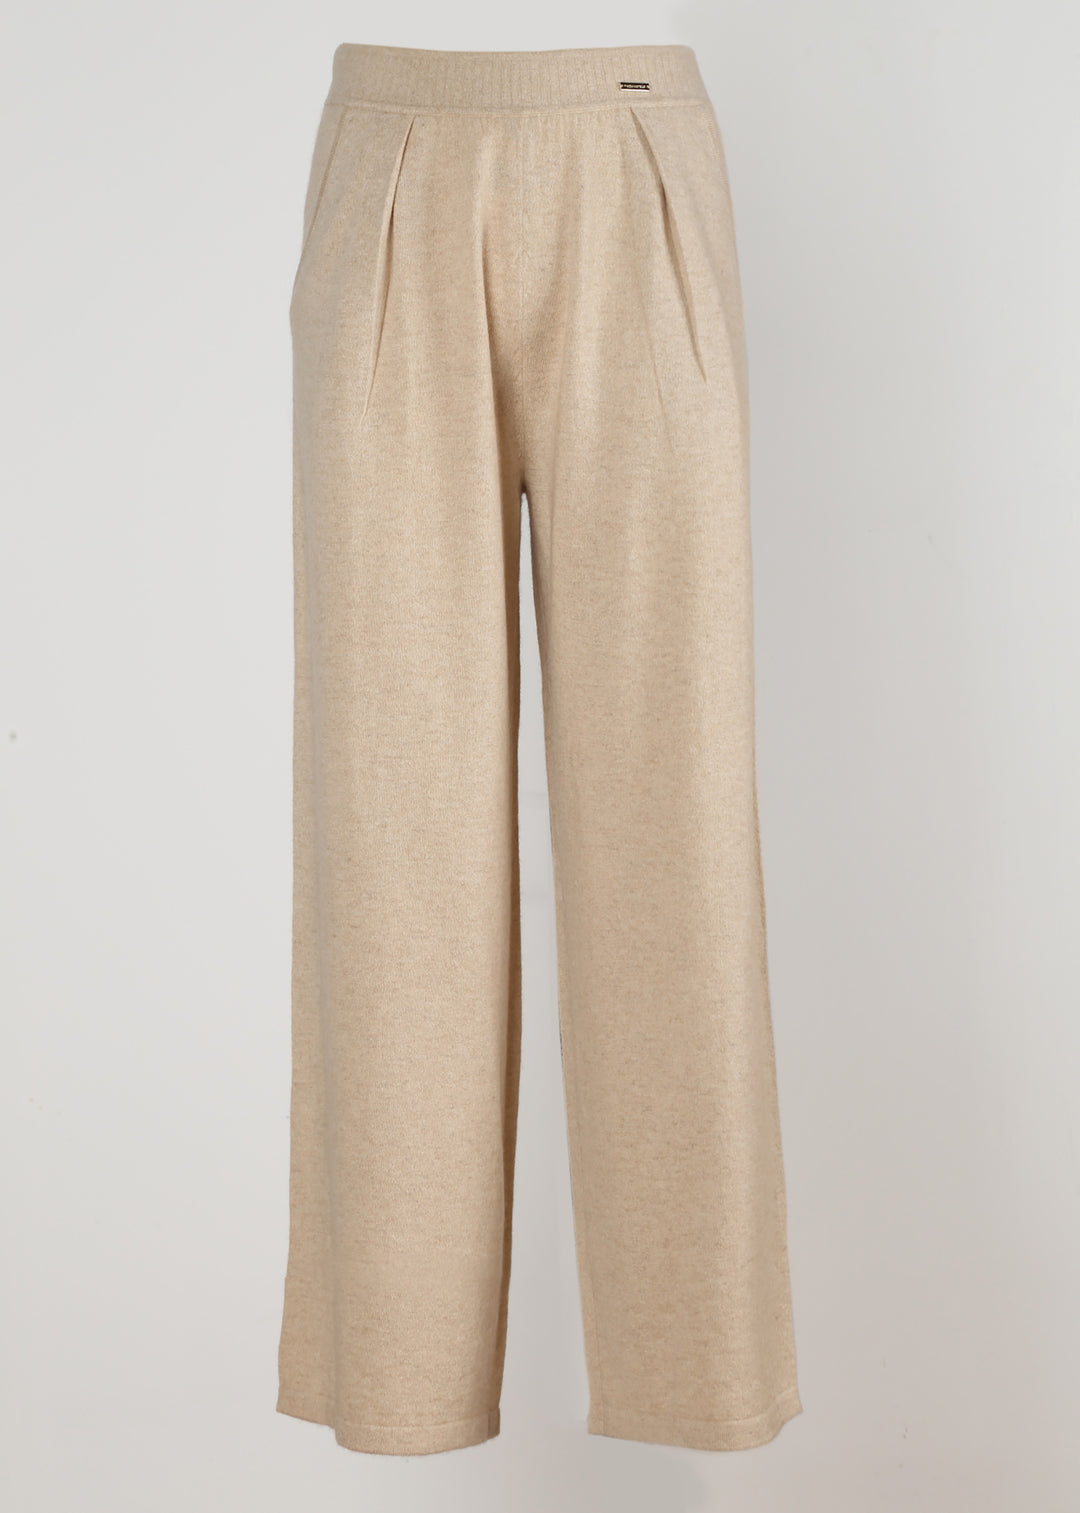 Cashmere Trousers with Pleats